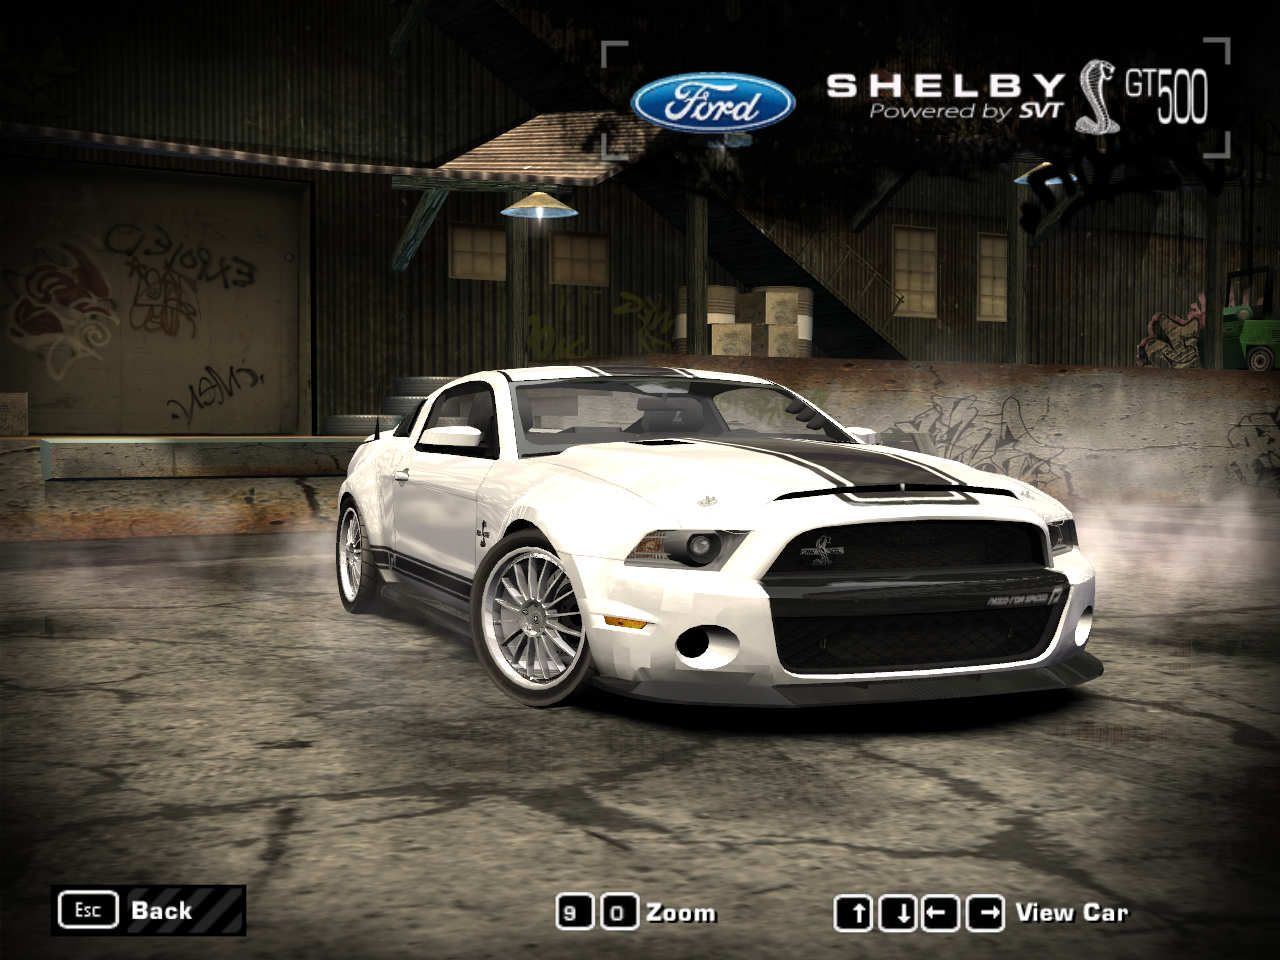 Need For Speed Most Wanted Ford Shelby GT500 Super Snake - "The Run" Edition (2012)